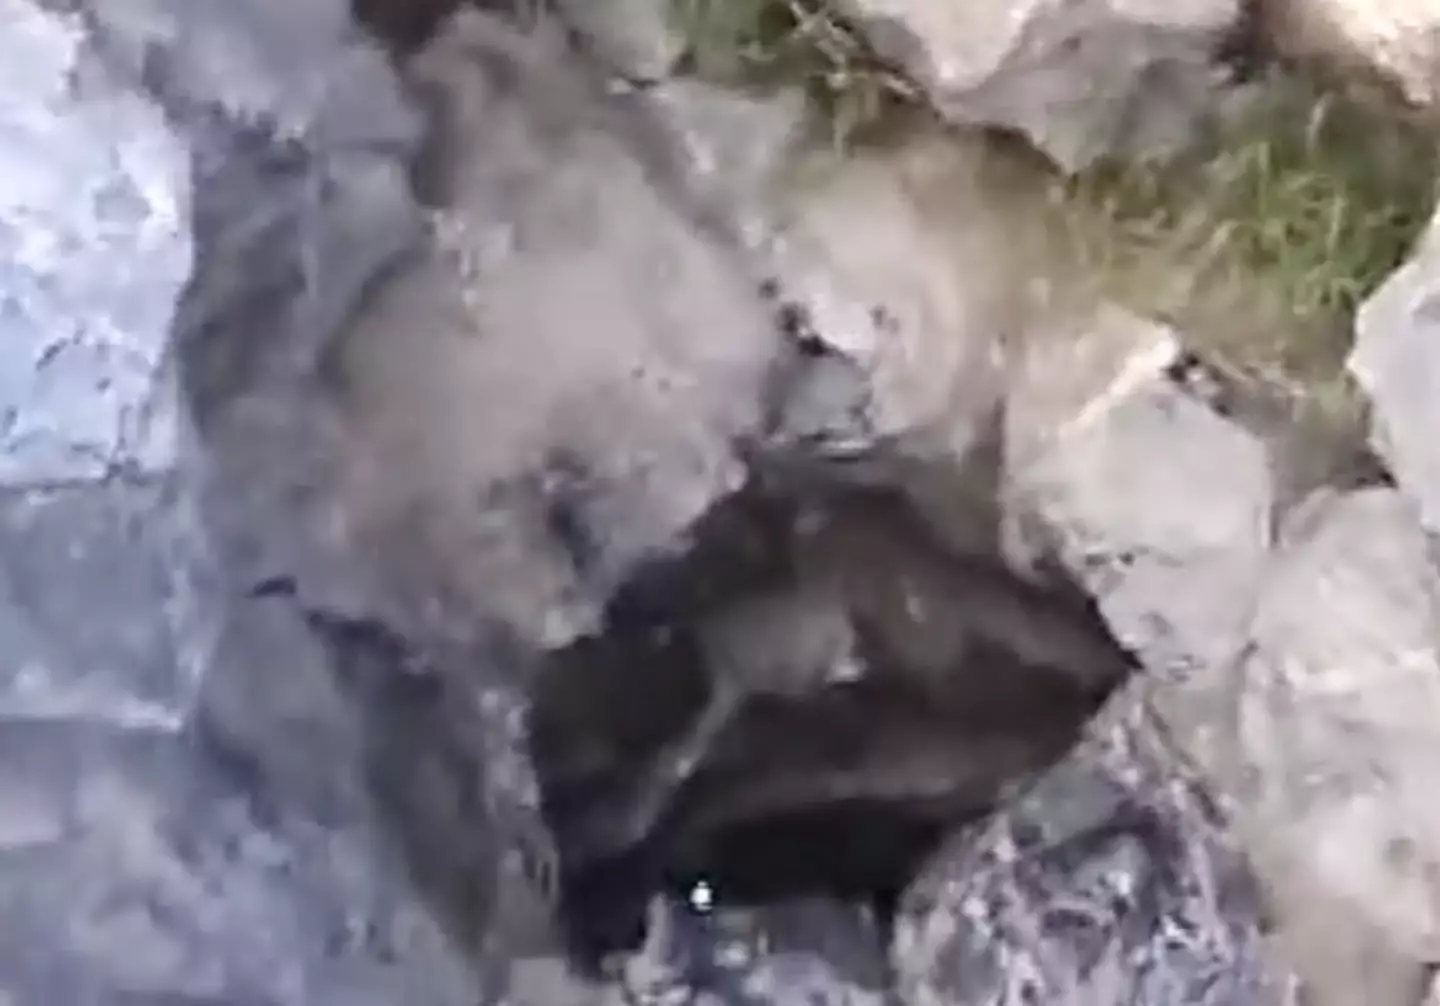 The large cave was accessed by a small surface hole. YouTube/CBG